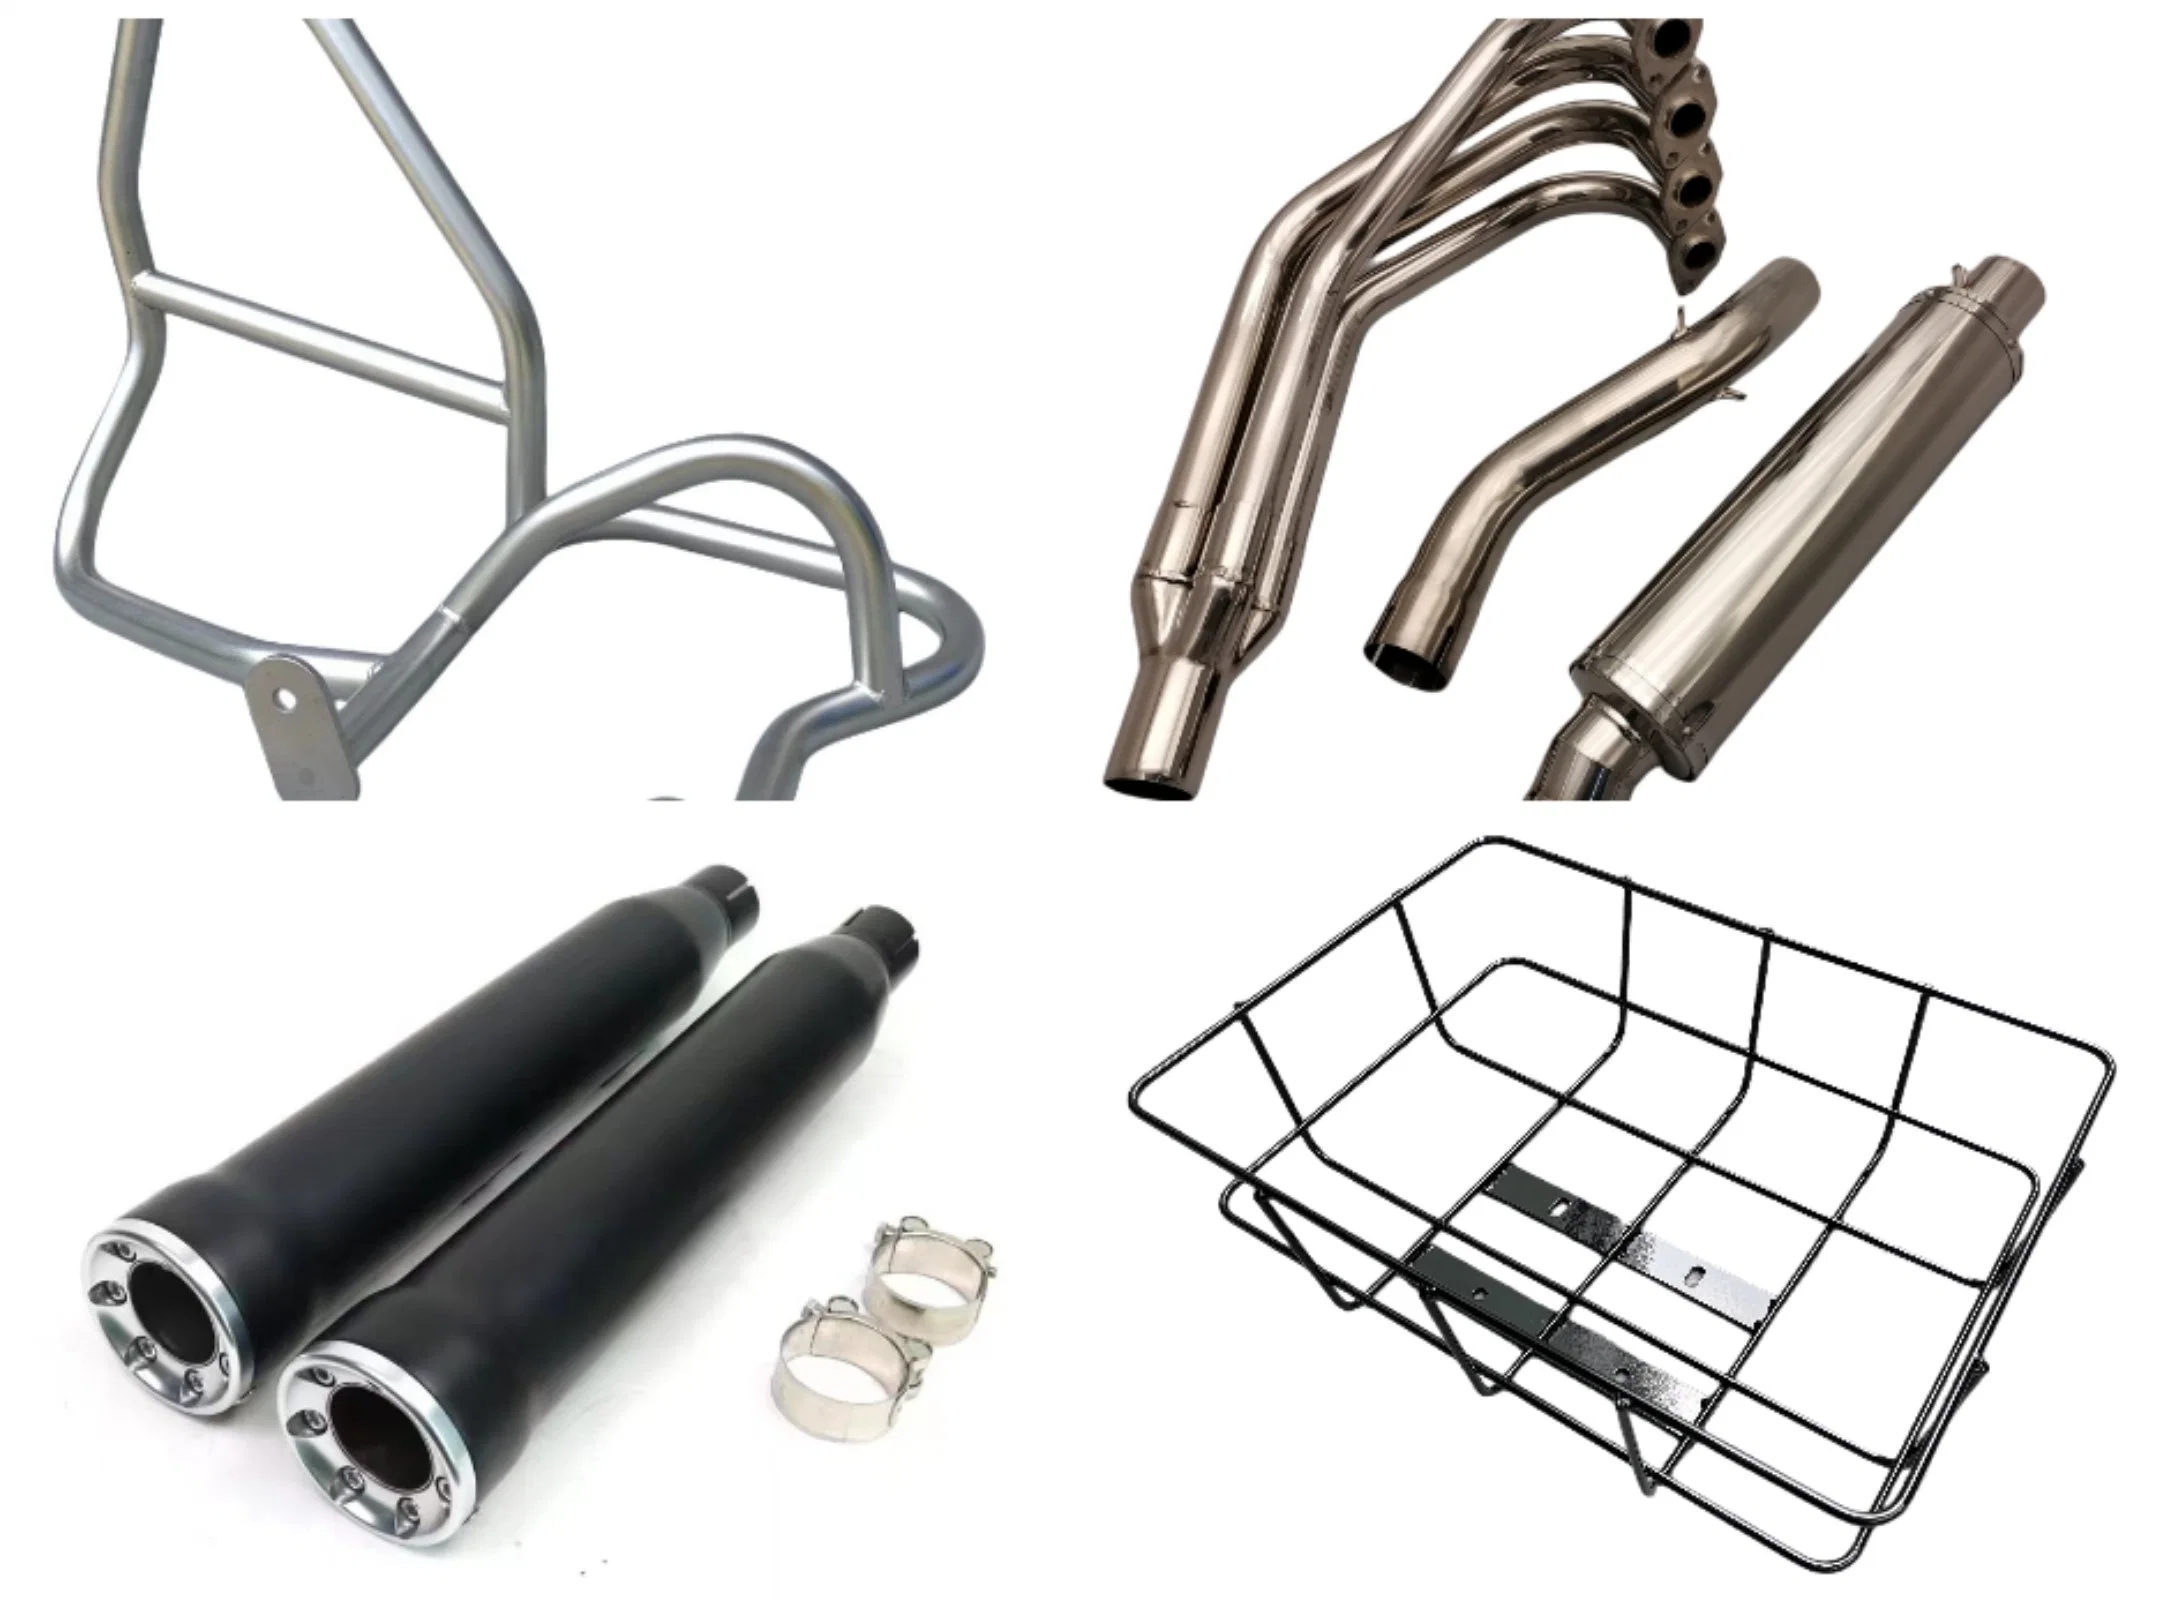 OEM Motorcycle Parts/ Auto Accessories / Stainless Steel Motorcycle Parts